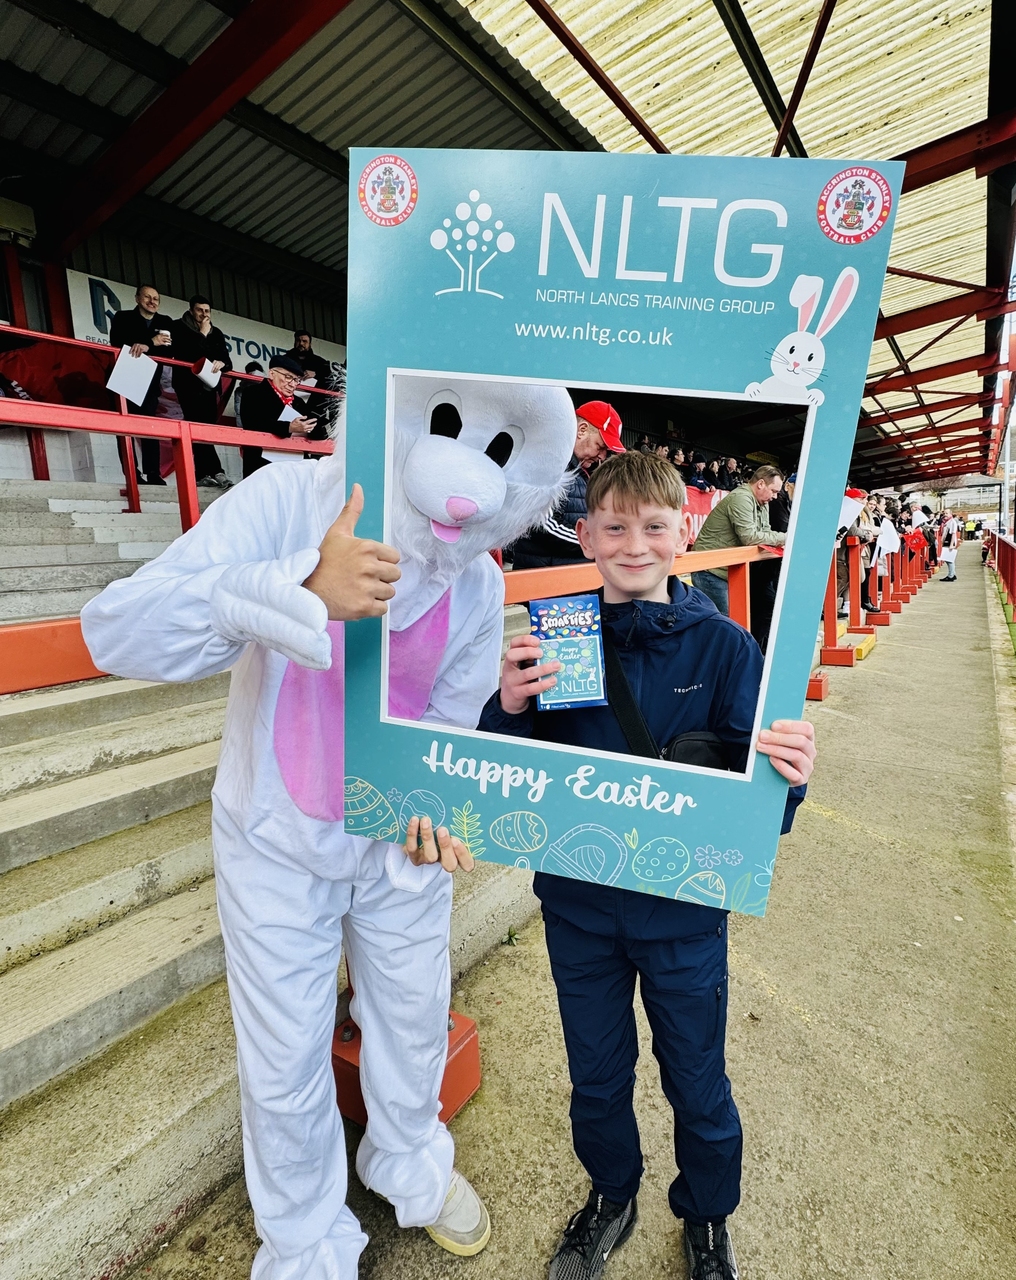 Young fans egg-static after Accrington Stanley and NLTG Good Friday giveaway